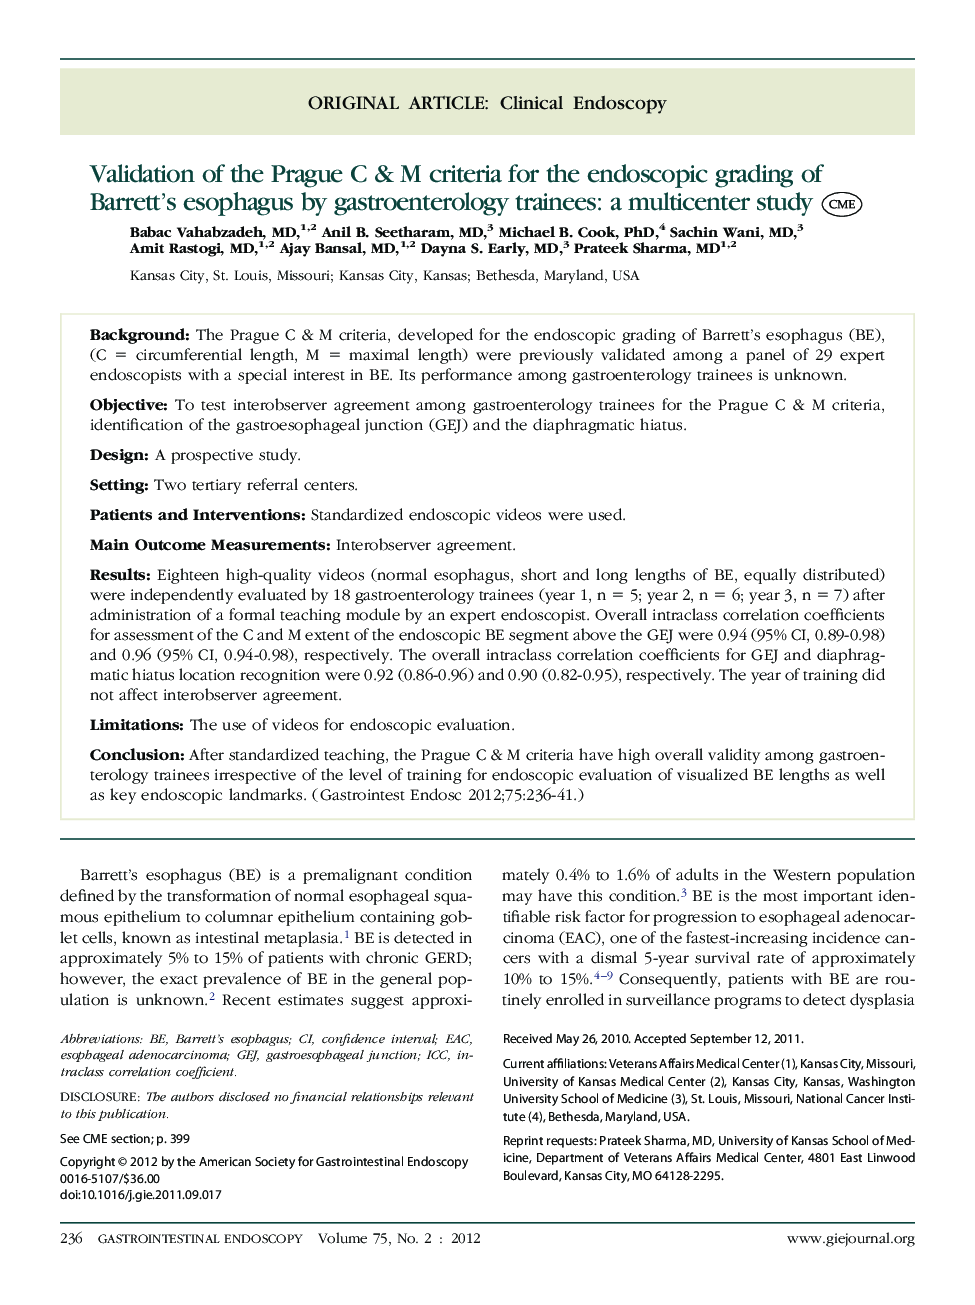 Validation of the Prague C & M criteria for the endoscopic grading of Barrett's esophagus by gastroenterology trainees: a multicenter study 